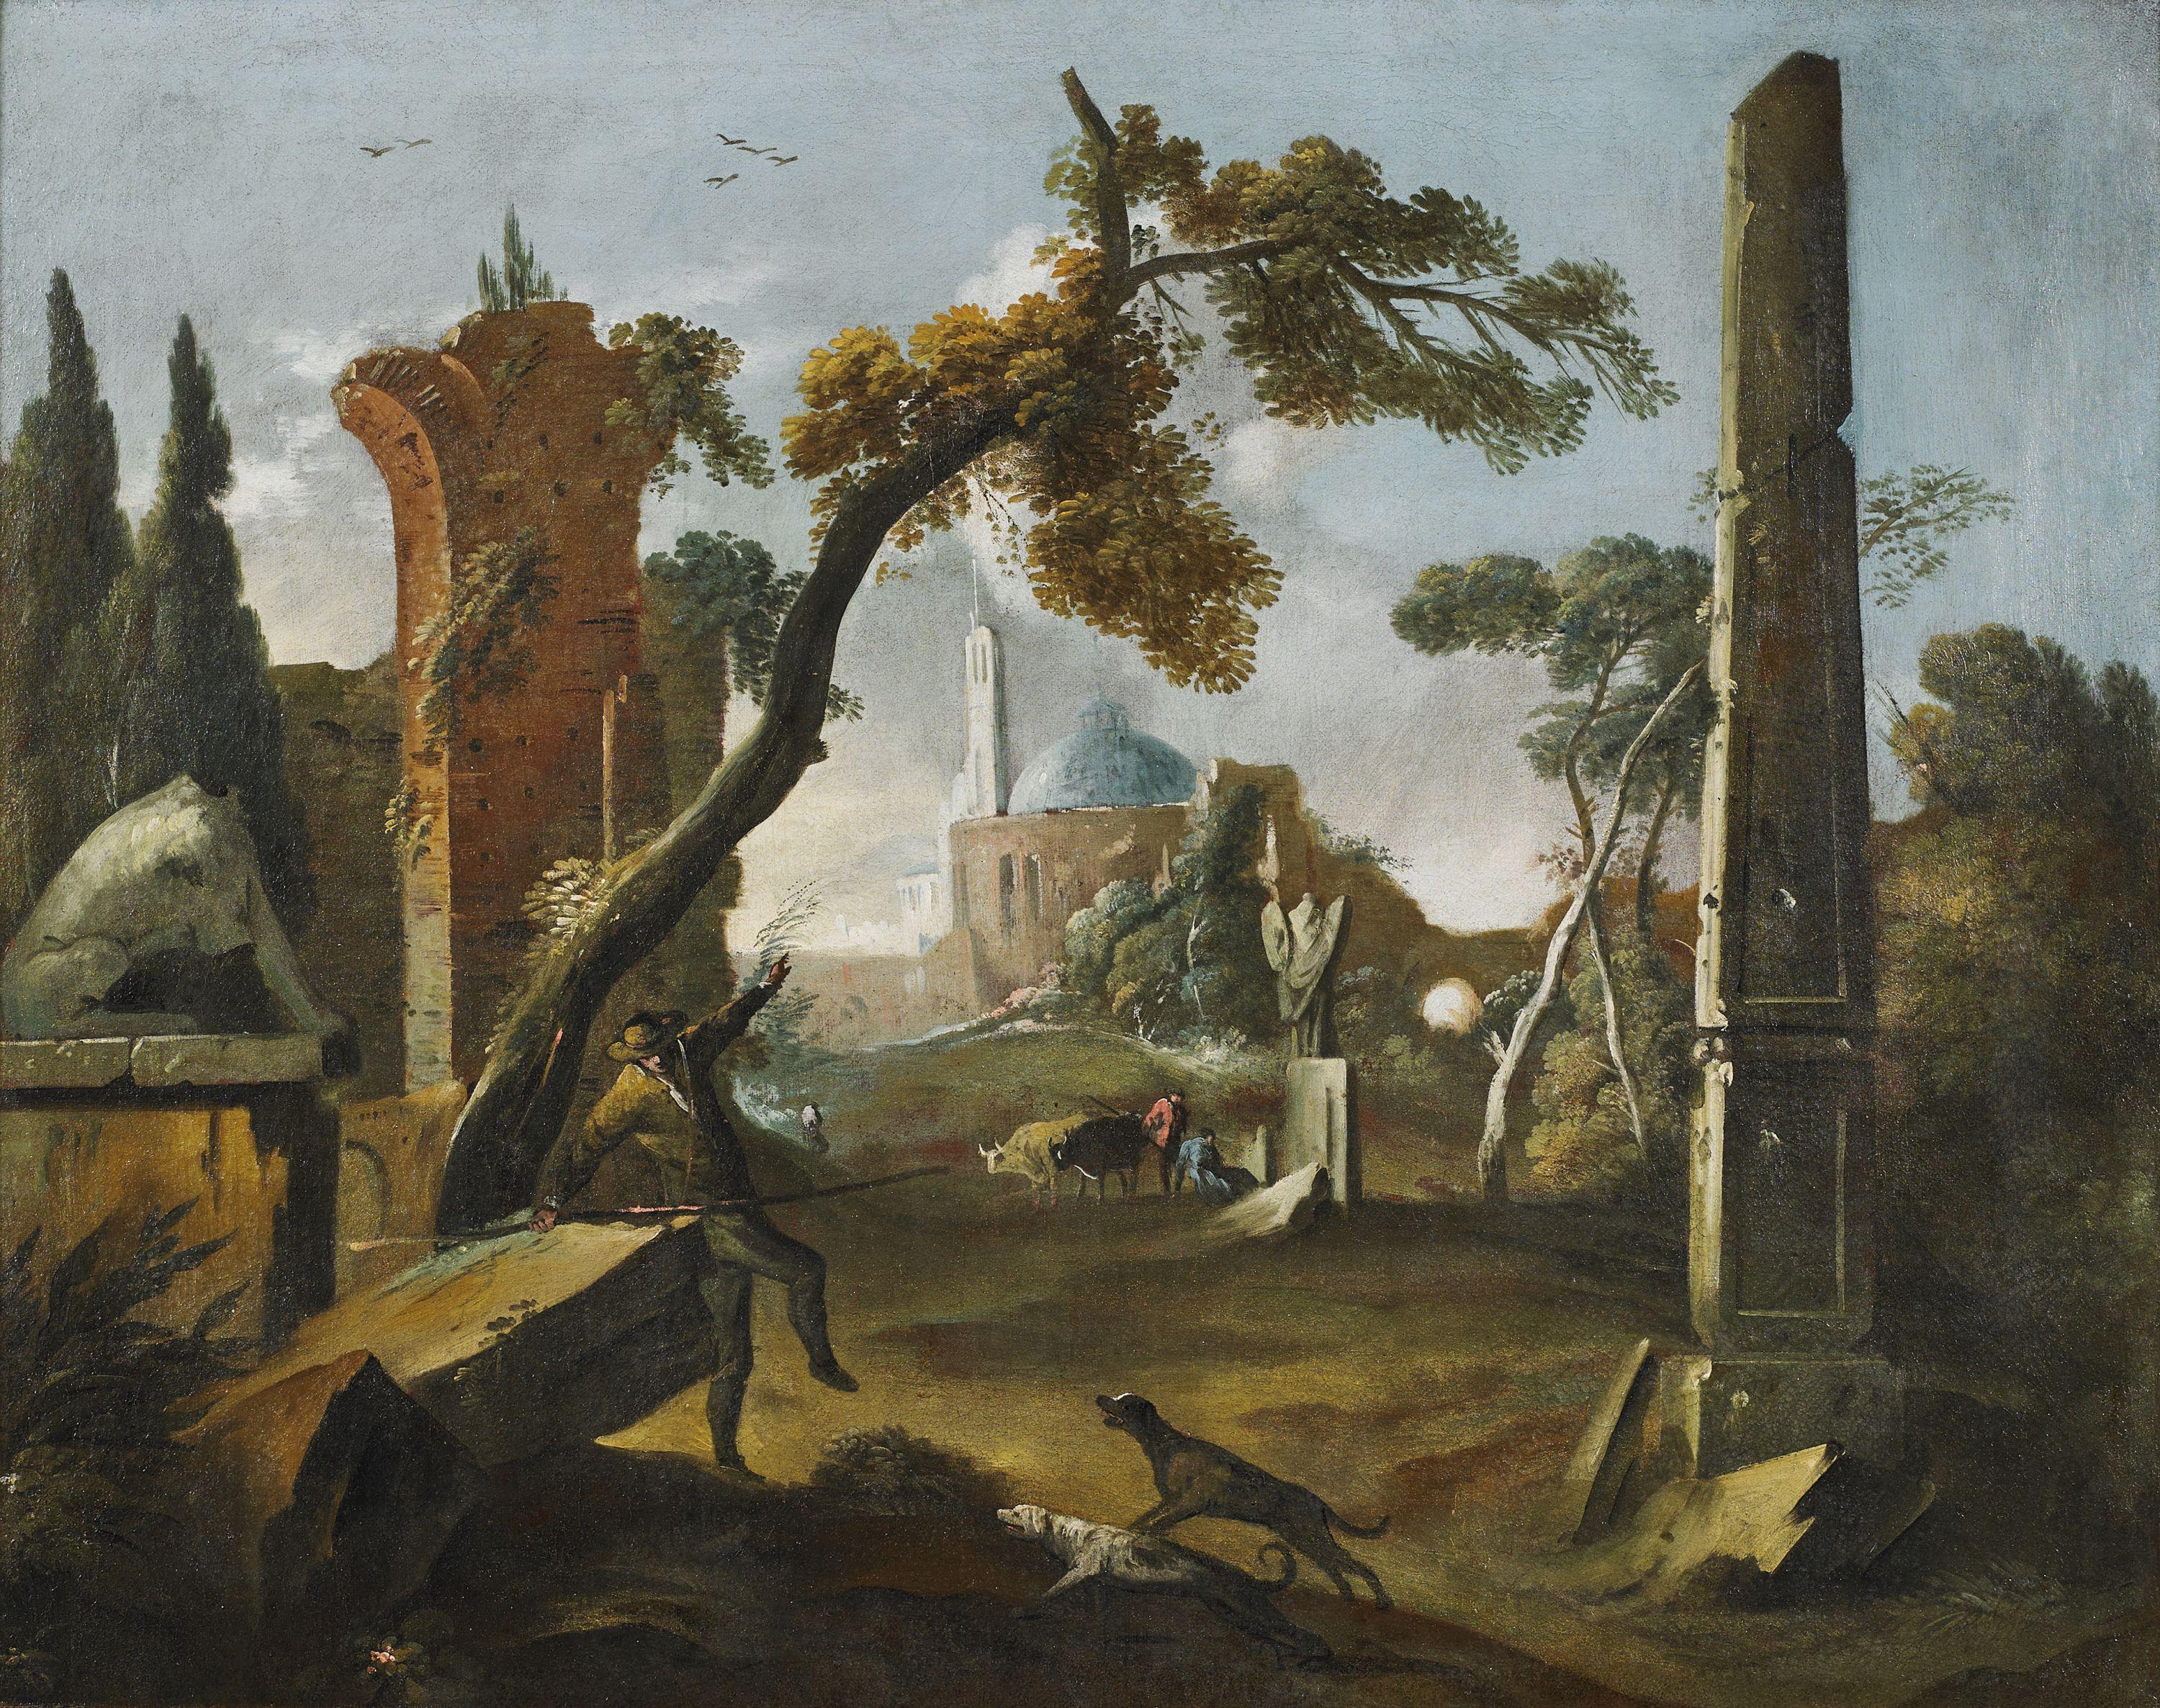 Oil painting on canvas measuring 85 x 110 cm without frame and 103 x 126 cm with frame depicting a landscape with figures and animals along the path by Gaetano Vetturali.

In the work in question, depicting a large country piece, the youthful